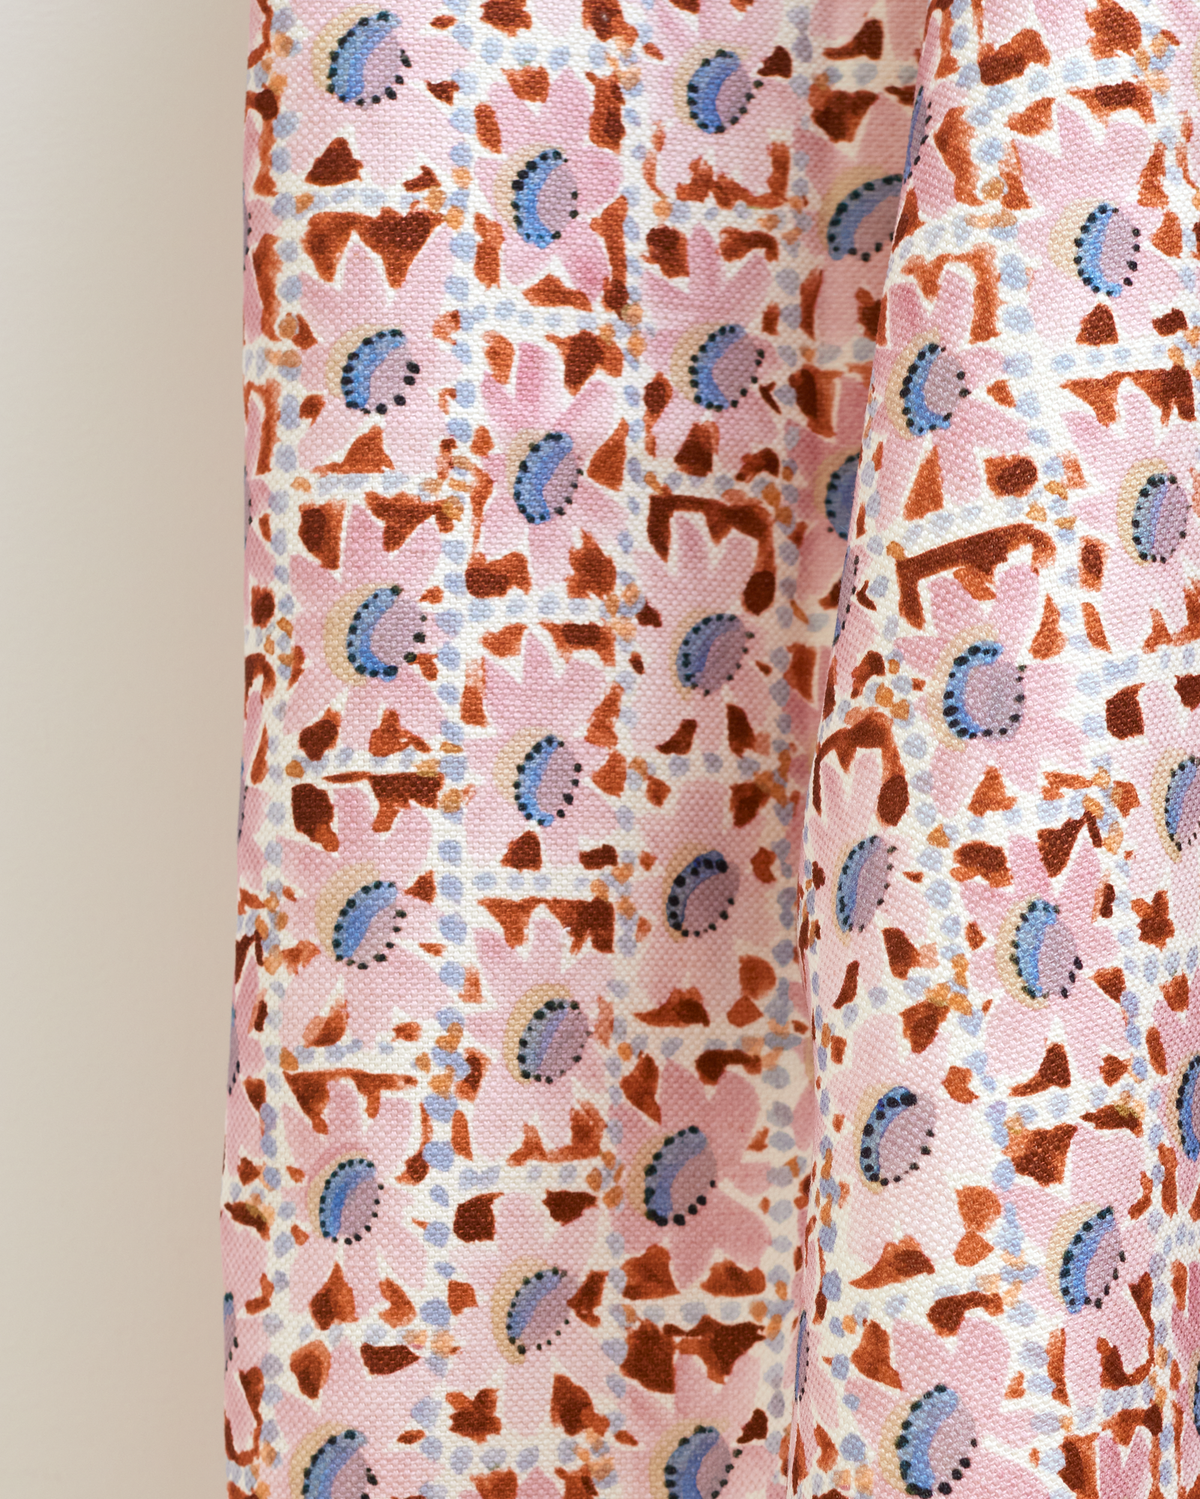 Floral Trellis Fabric in Pink/Rust